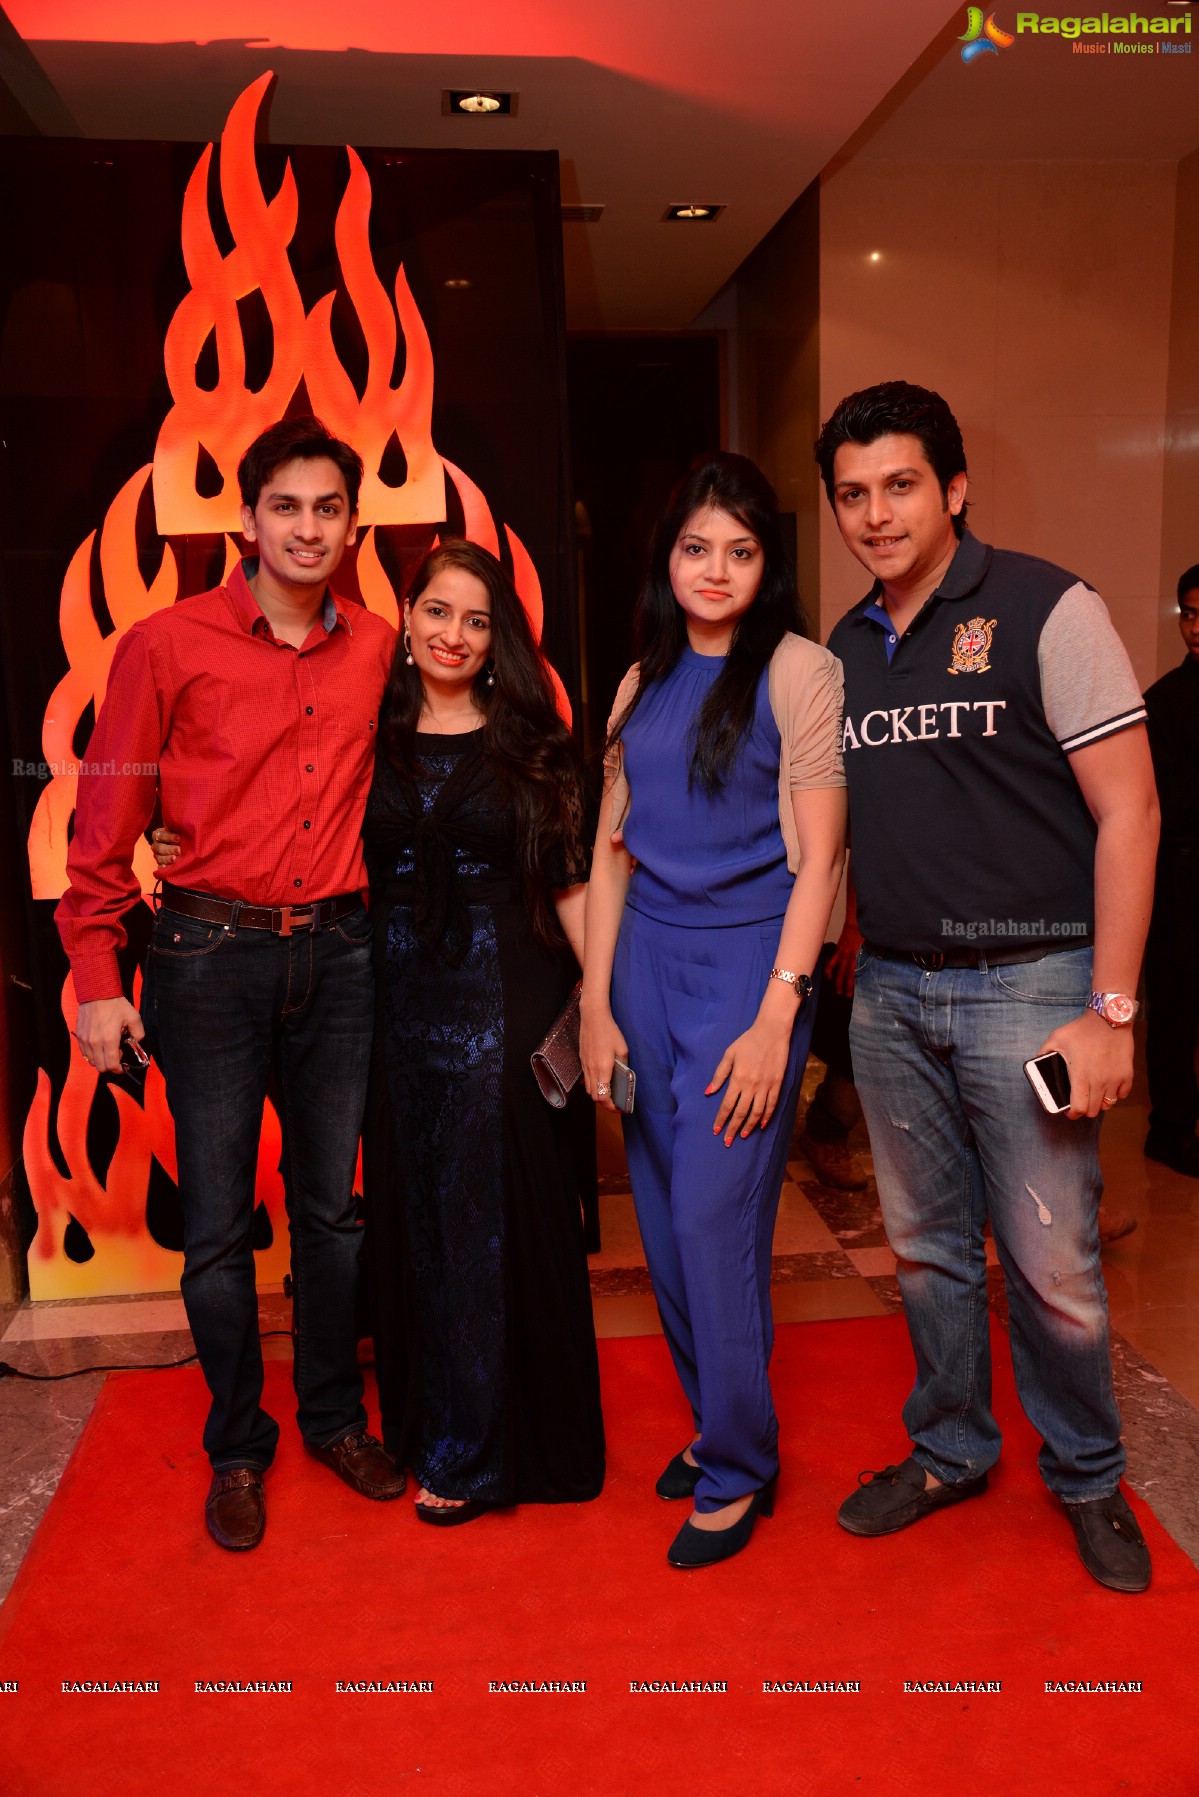 The Round Table India Evening Party at Marigold, Hyderabad